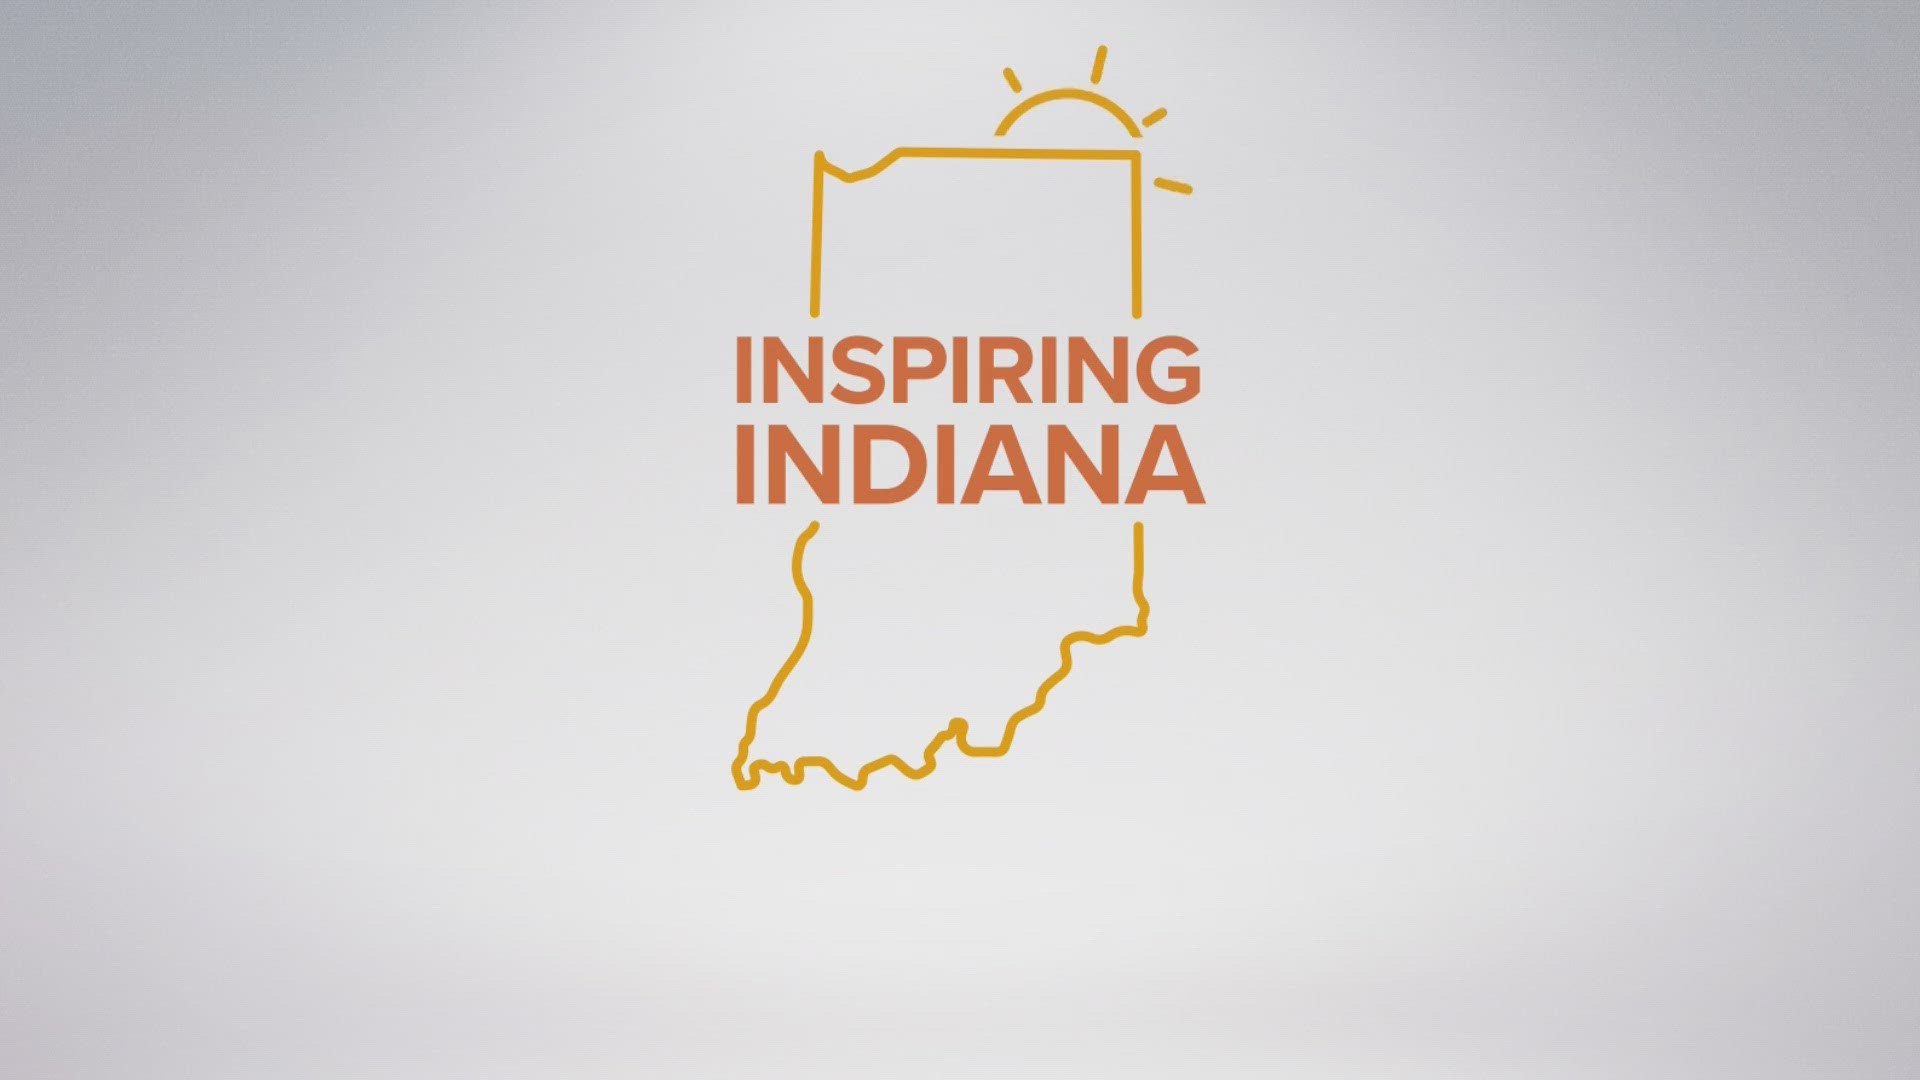 The Pike Township's trustee's work to help new moms is inspiring Indiana.